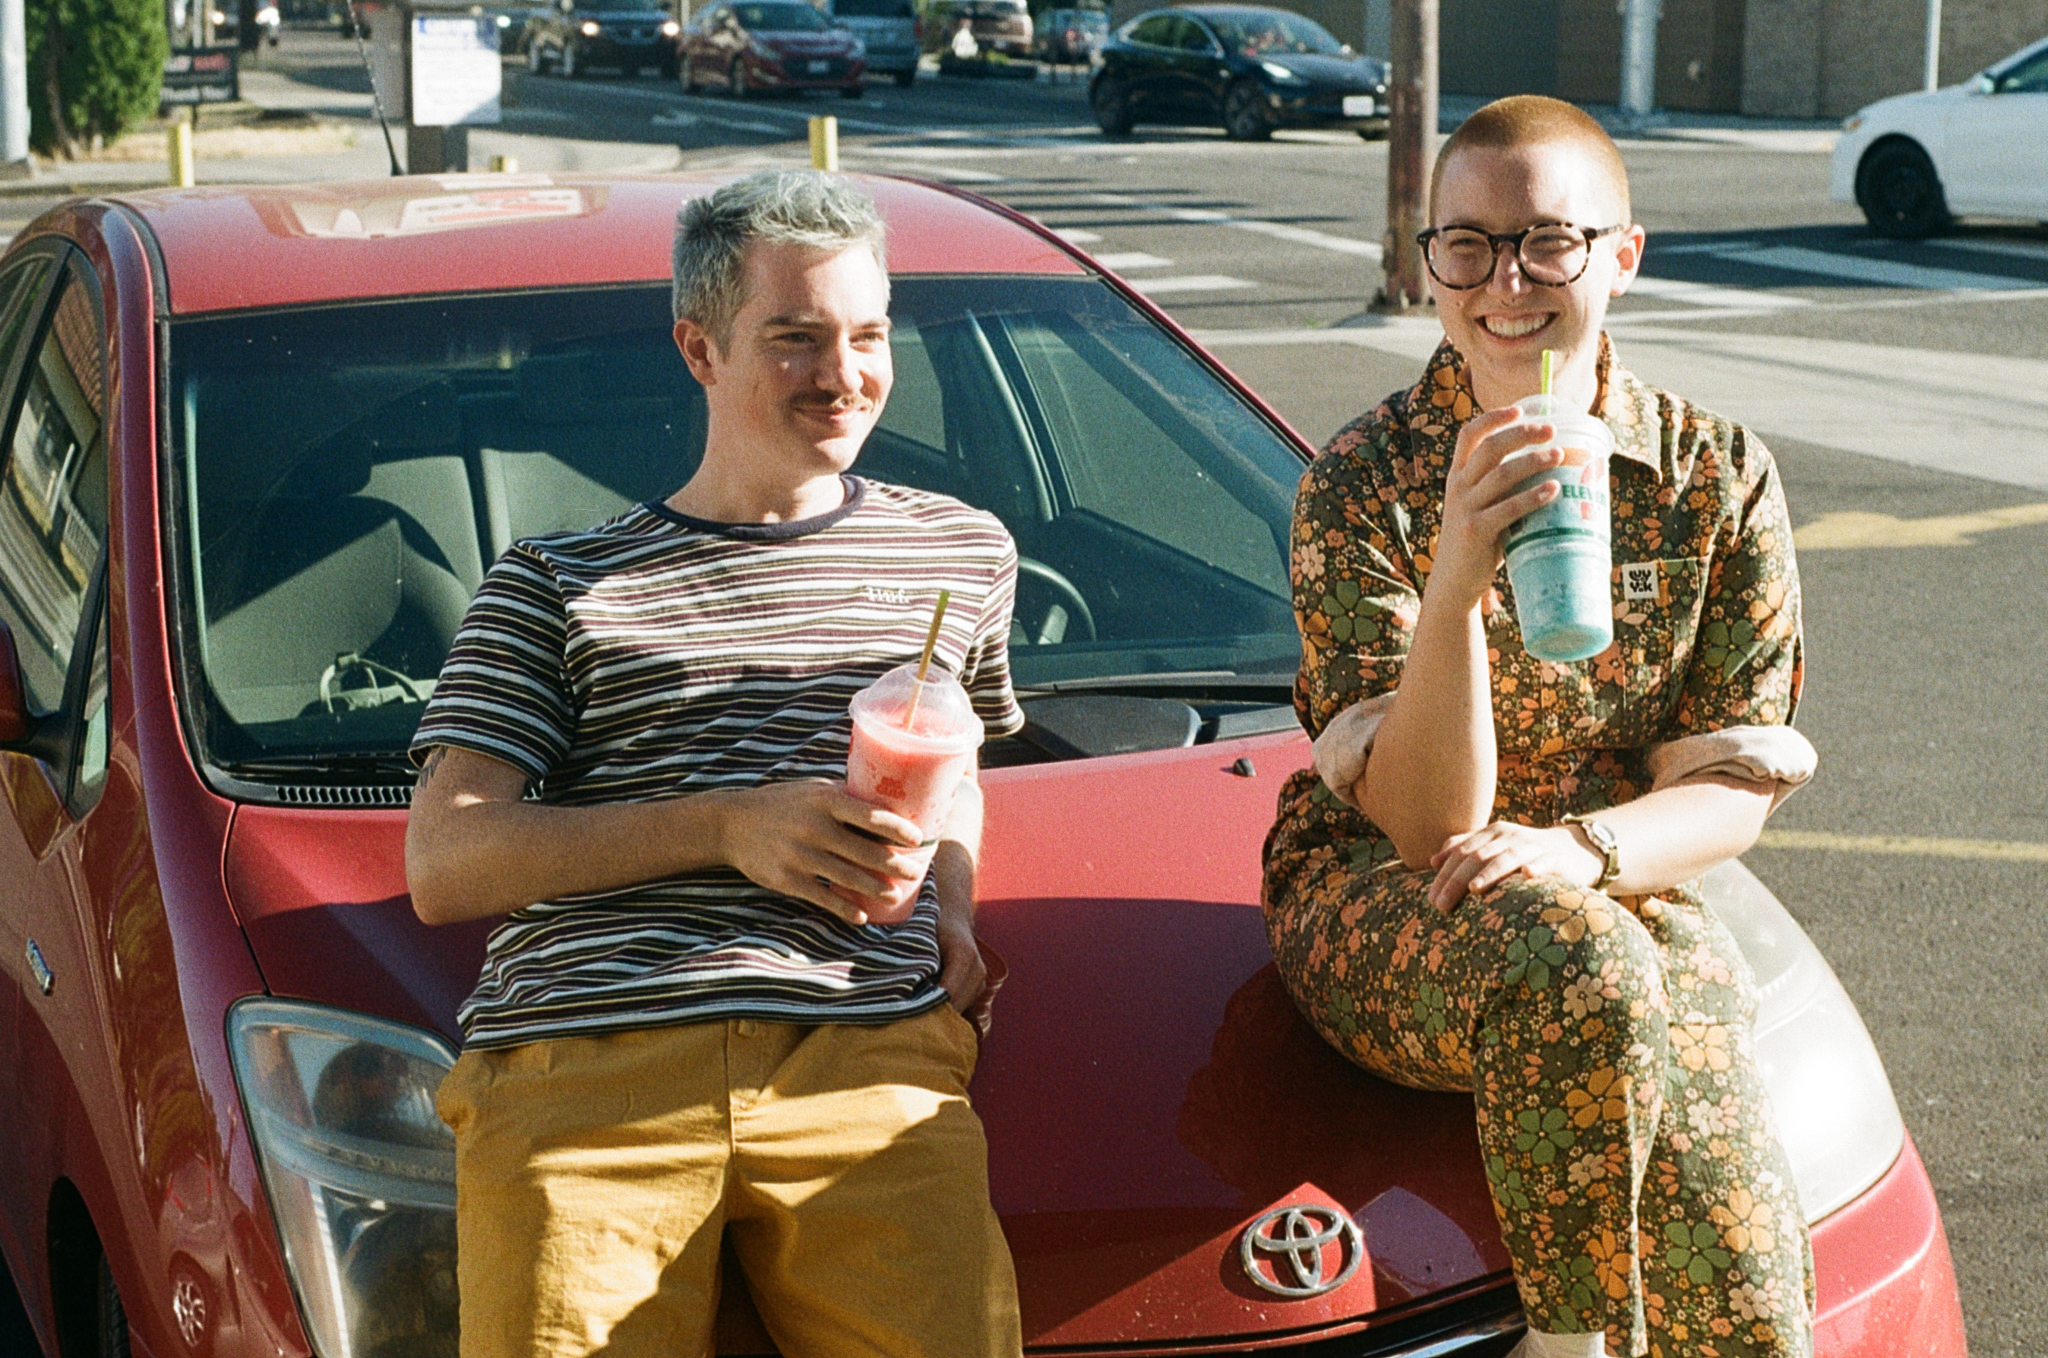 Listen to Foamboy’s new single, “Peach Smoothie” – debut LP, My Sober Daydream, is due 10/1